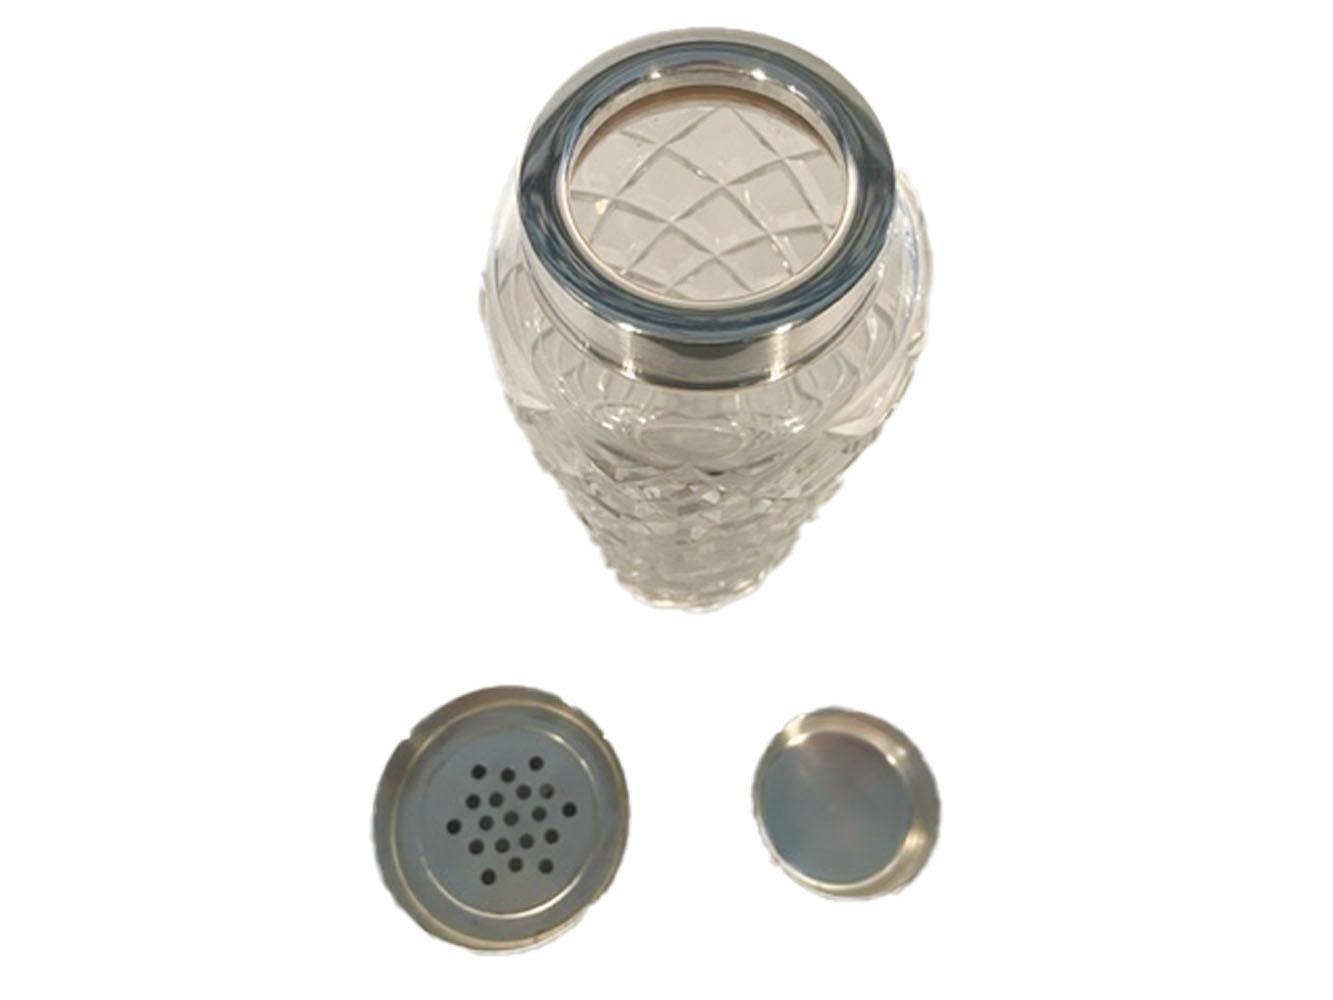 Vintage cocktail shaker of clear glass cut in a diamond pattern with a silver plate collar and center-pour strainer lid.